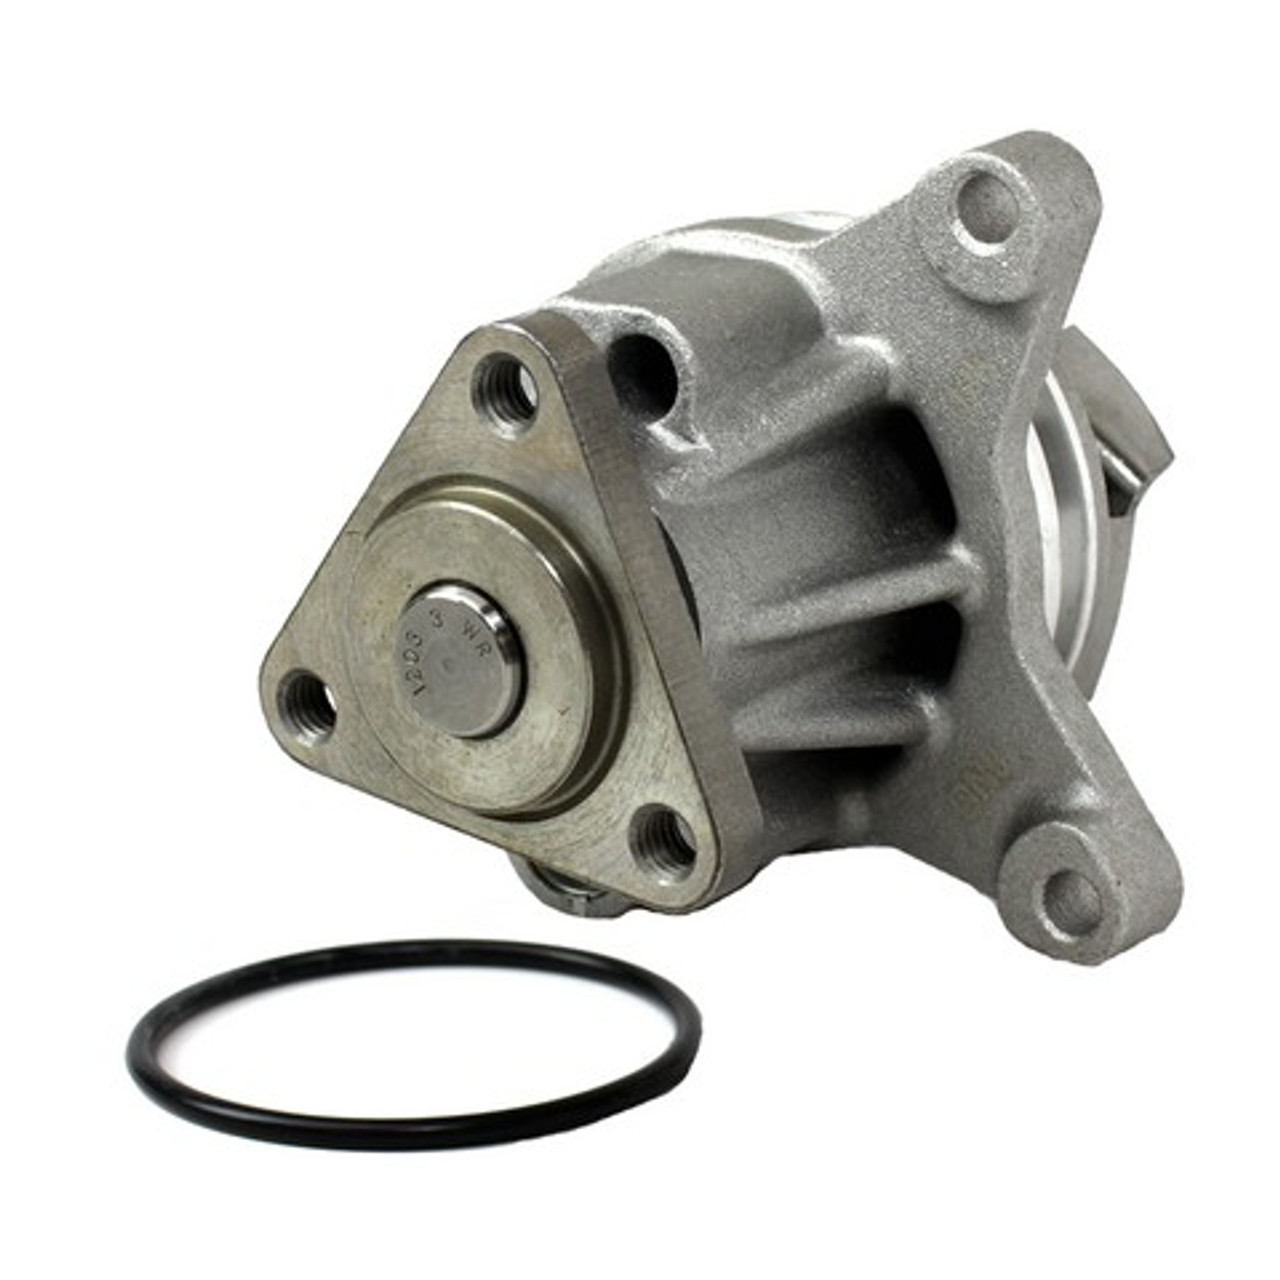 Water Pump 2.3L 2005 Ford Focus - WP4032.26